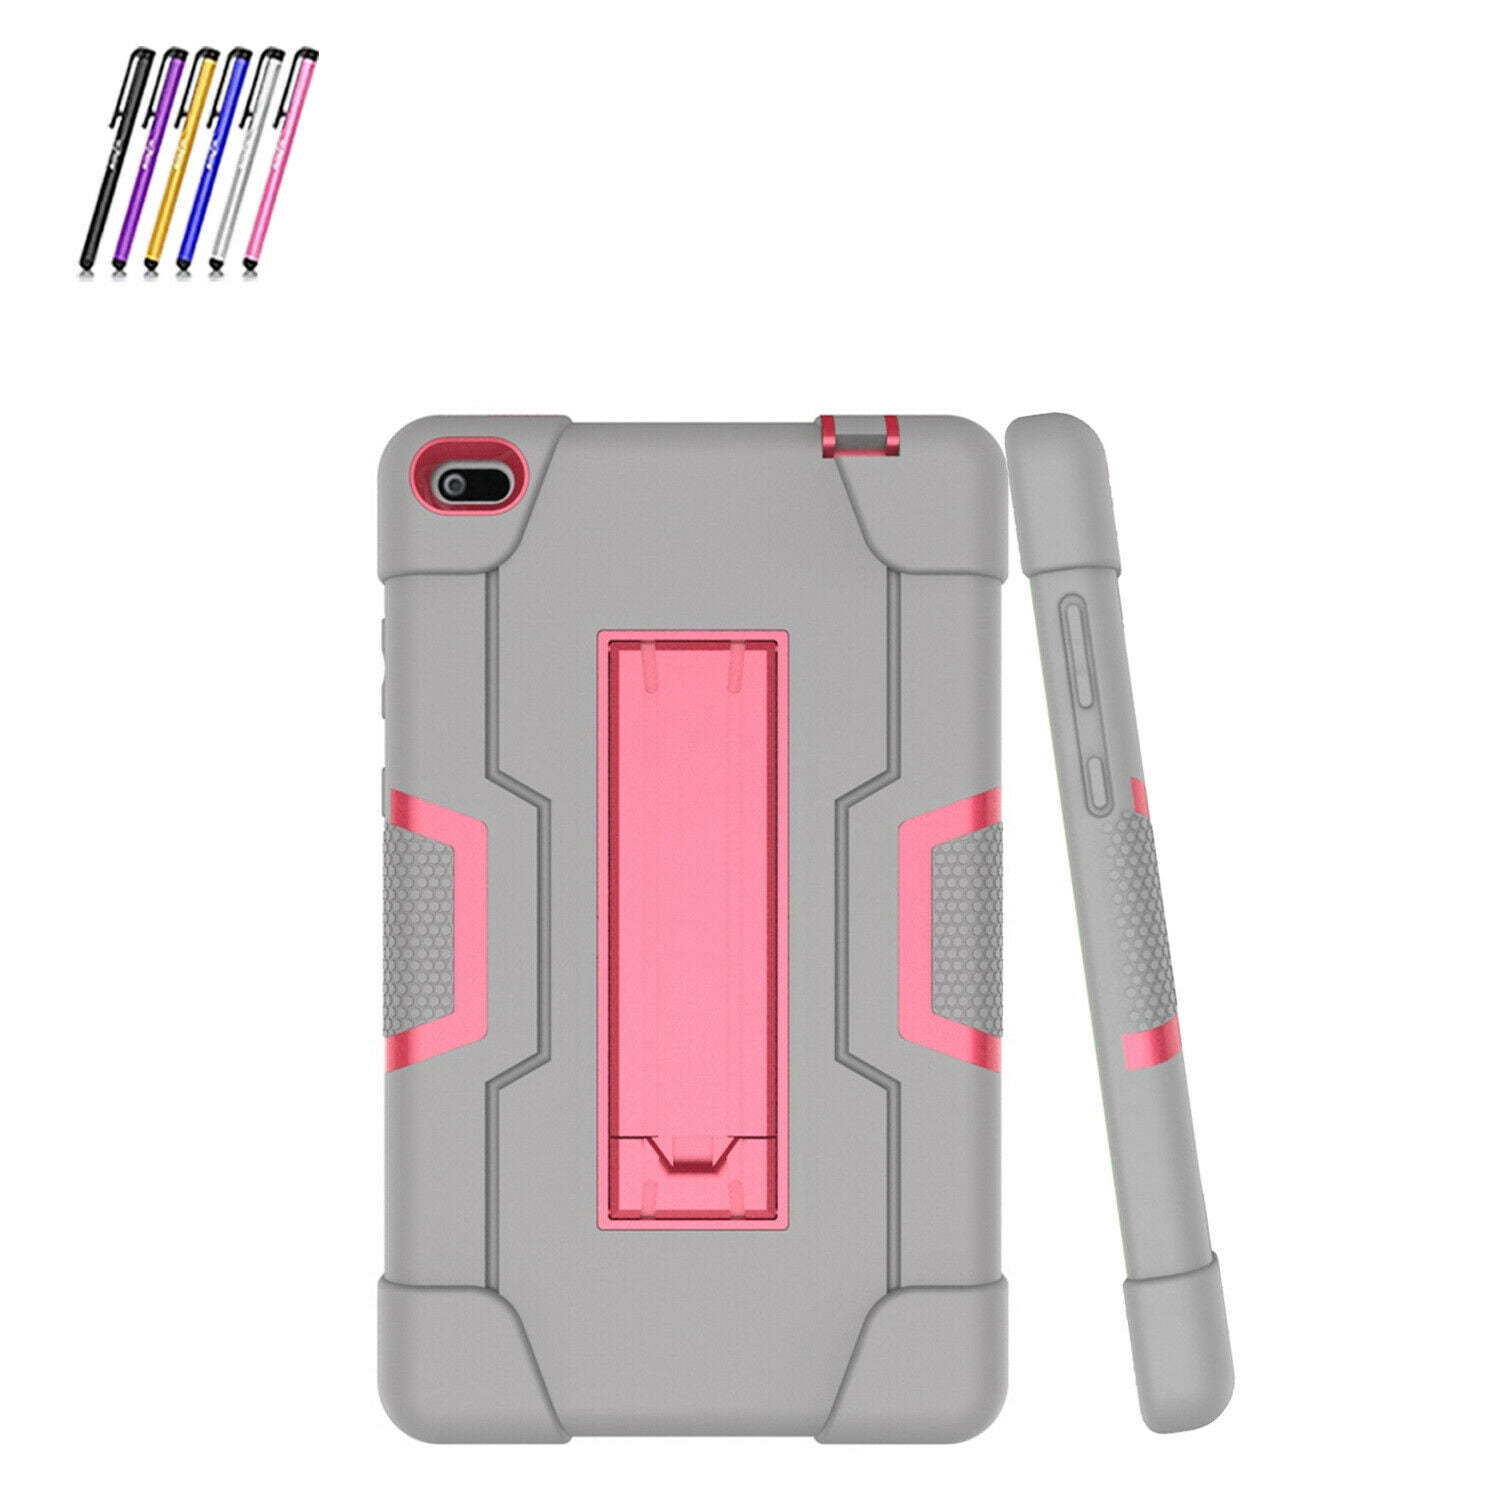 GoldCherry For Lenovo Tab E8 Case TB-8304F Heavy Duty Rugged Hybrid Armor  with Build in Kickstand Cover for Lenovo Tab E8 TB-8304F/TB-8304F1 Tablet(Gray+Pink  ) 